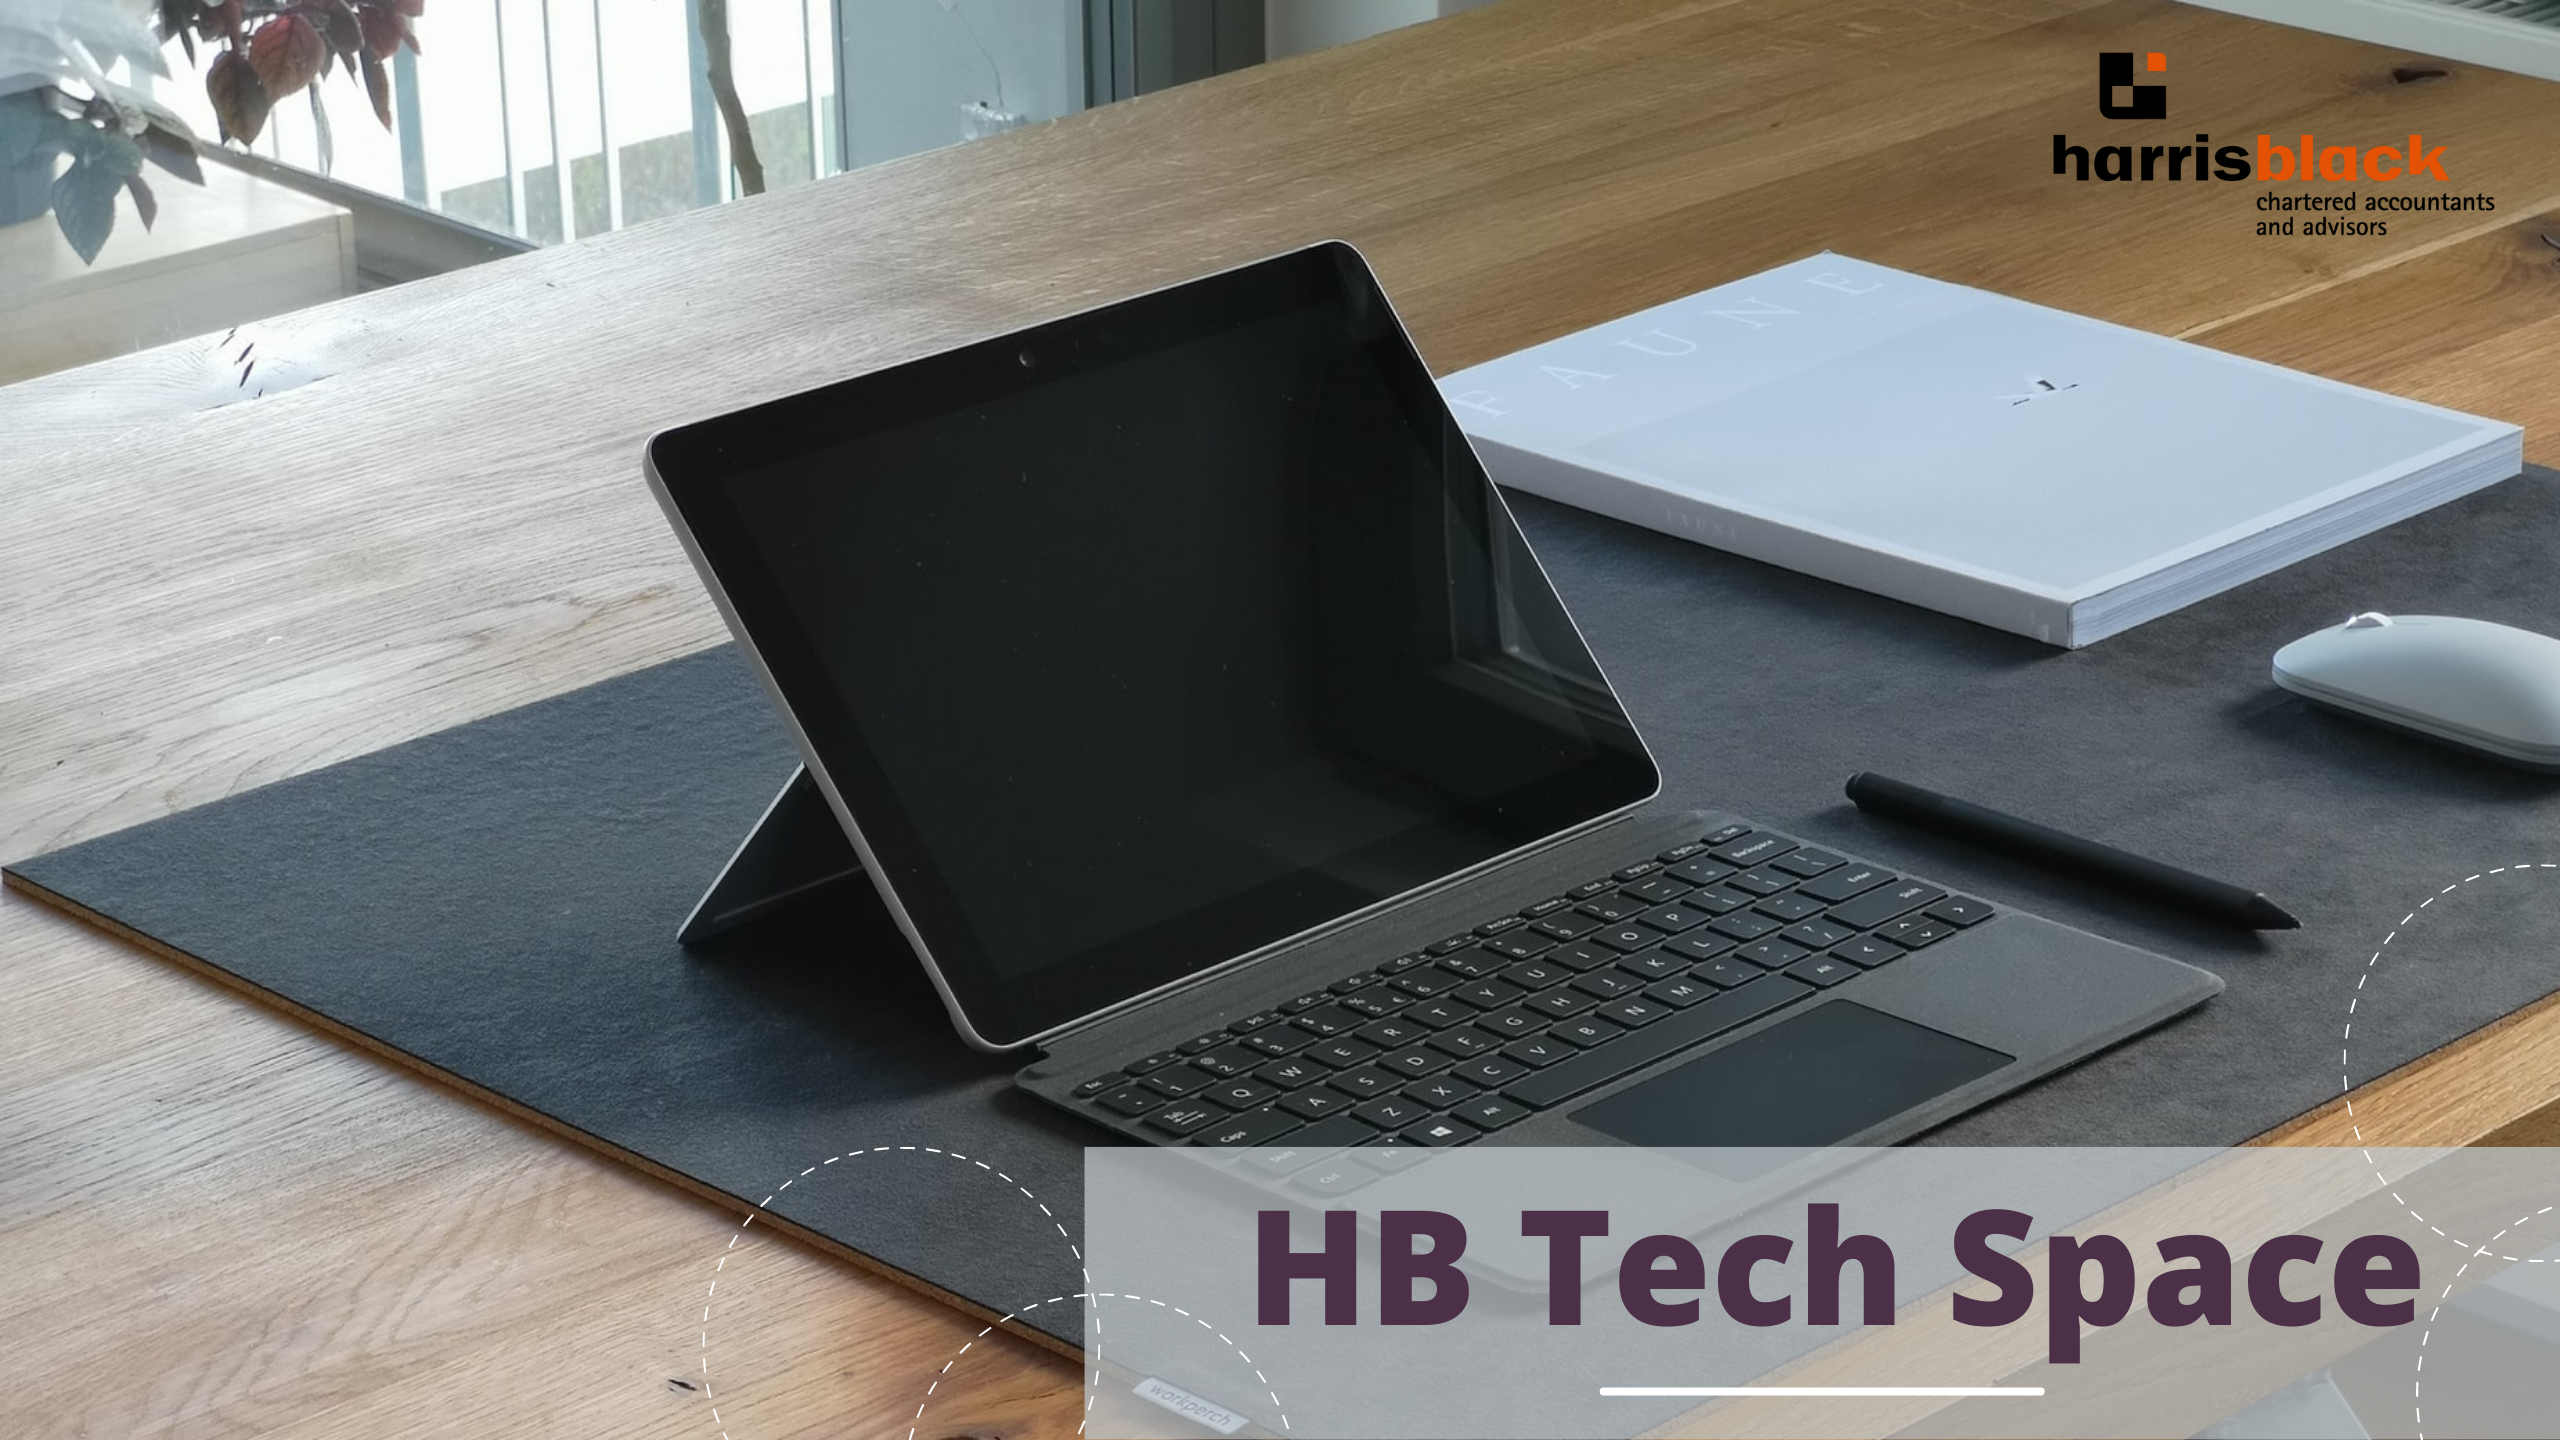 HB Tech Space: MS Excel Tips And Tricks